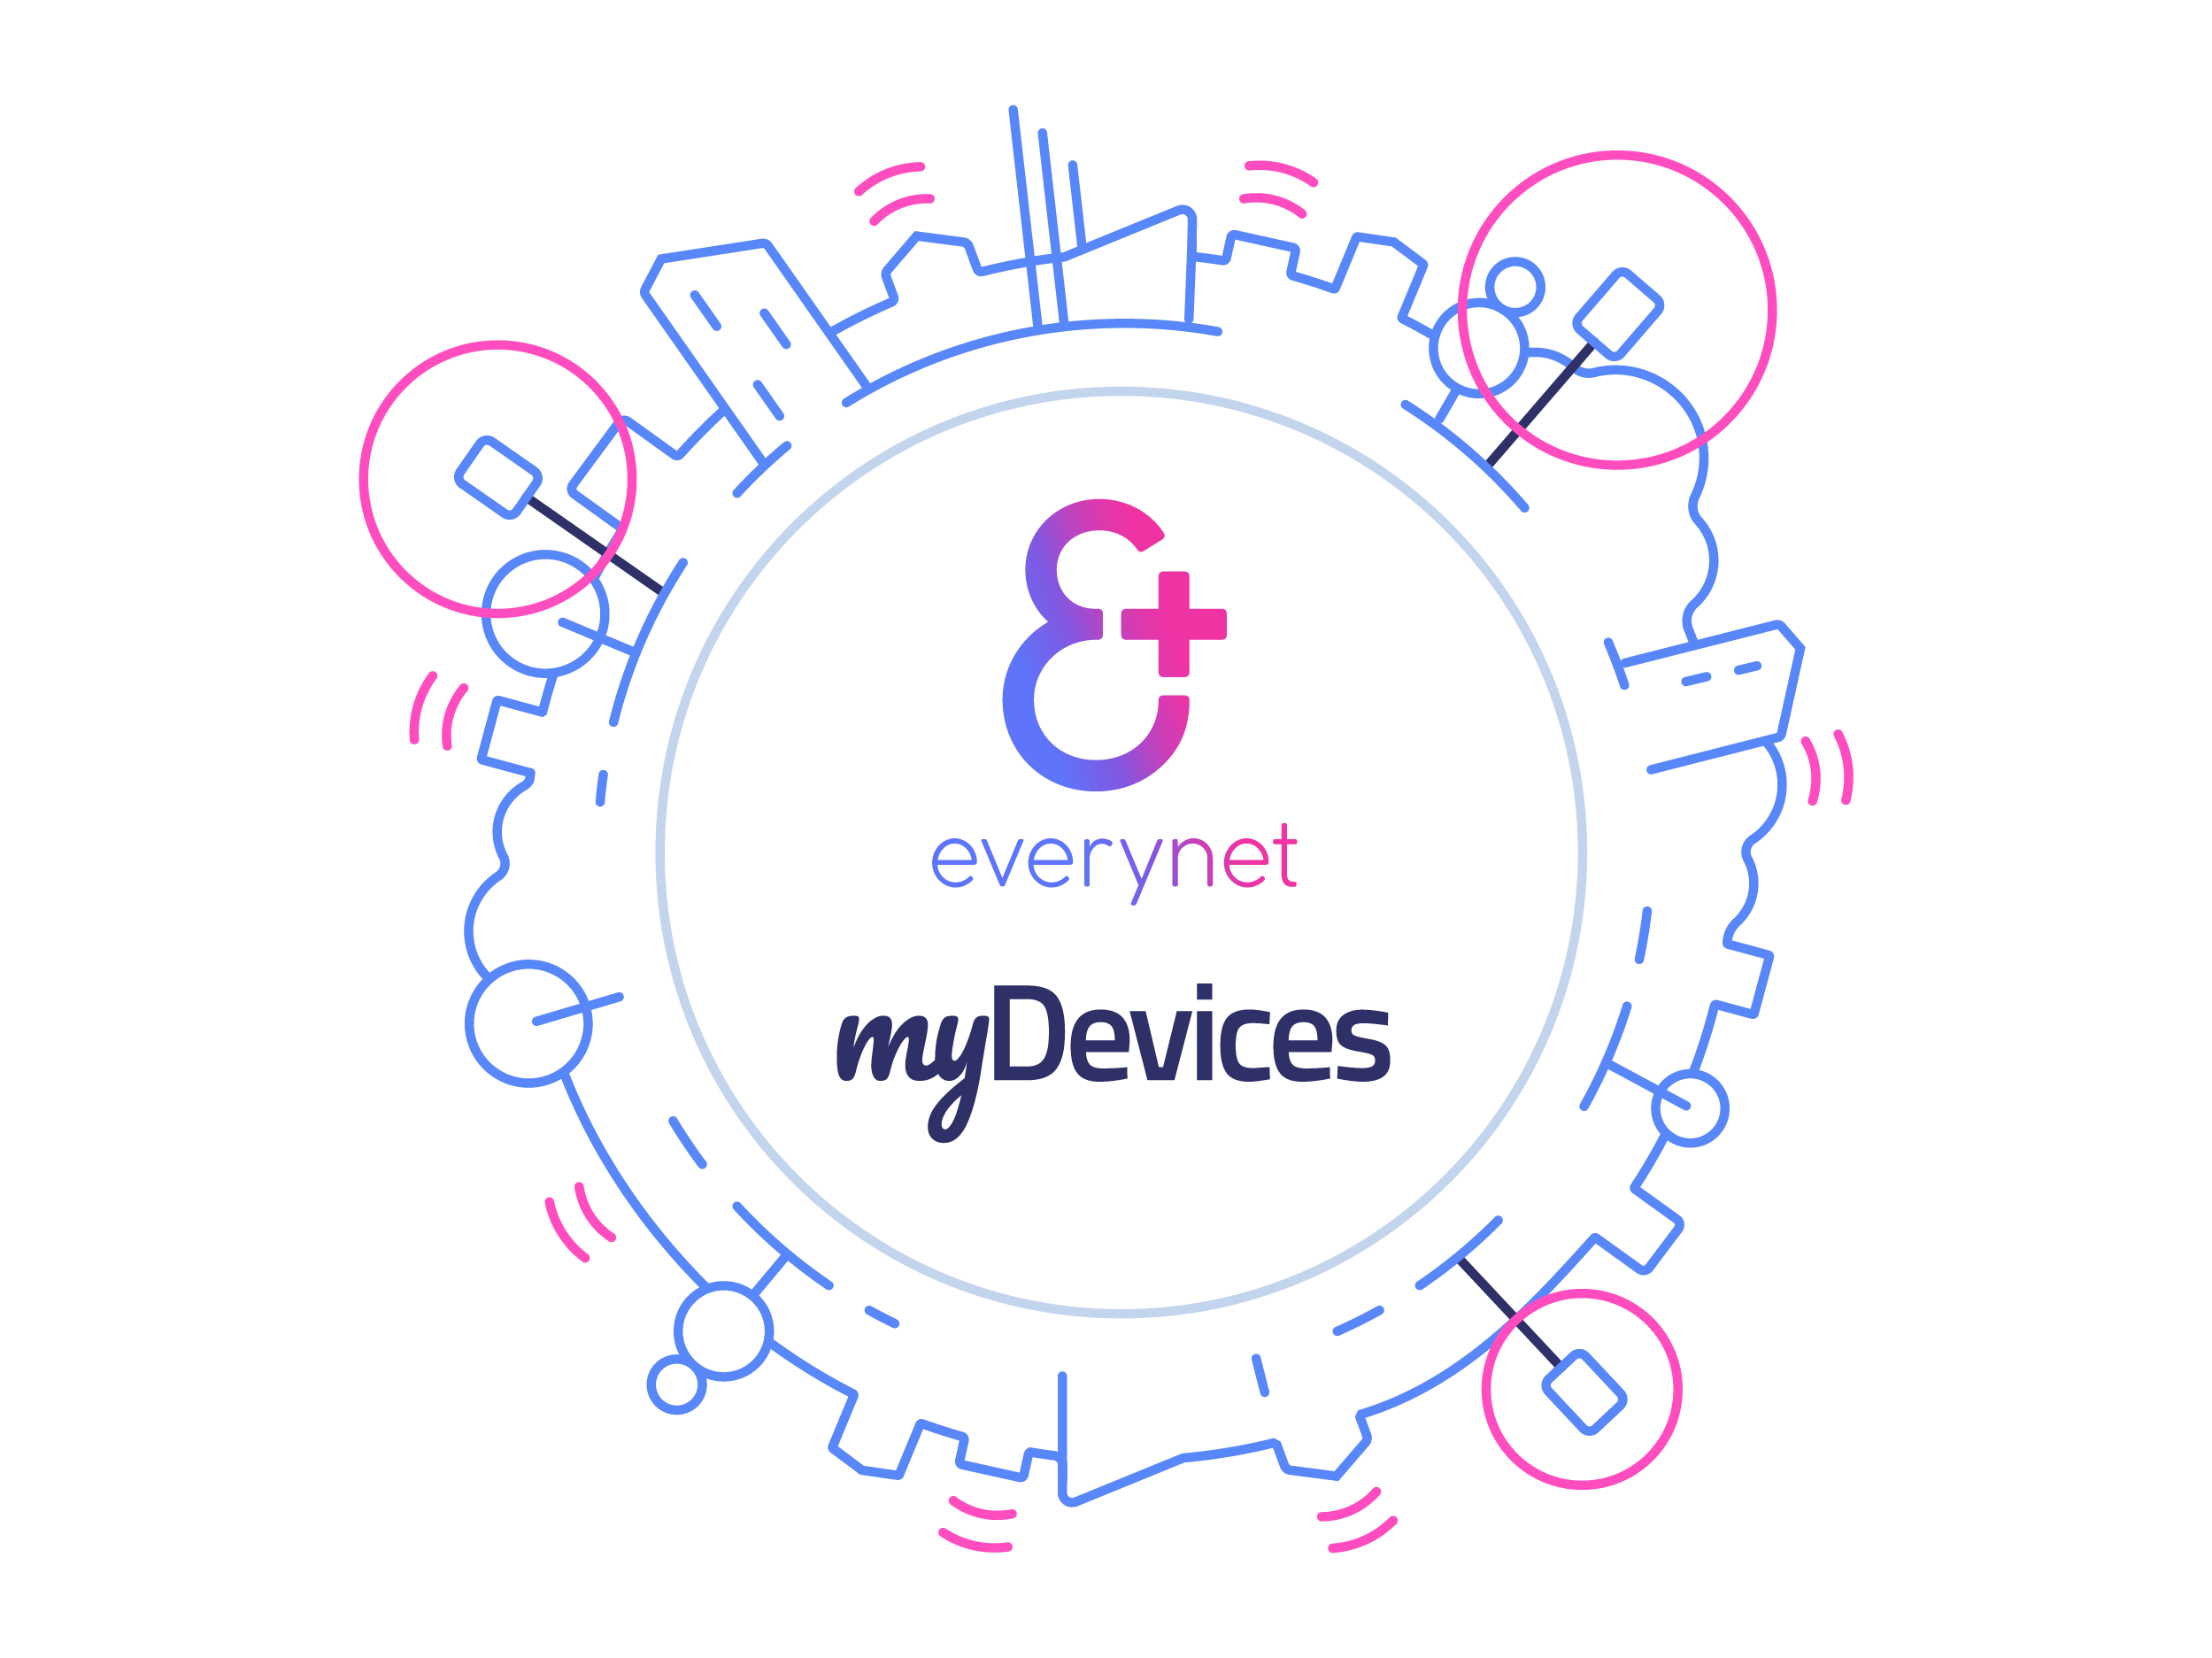 Everynet BV and myDevices announce major partnership to deliver an end-to-end IoT experience